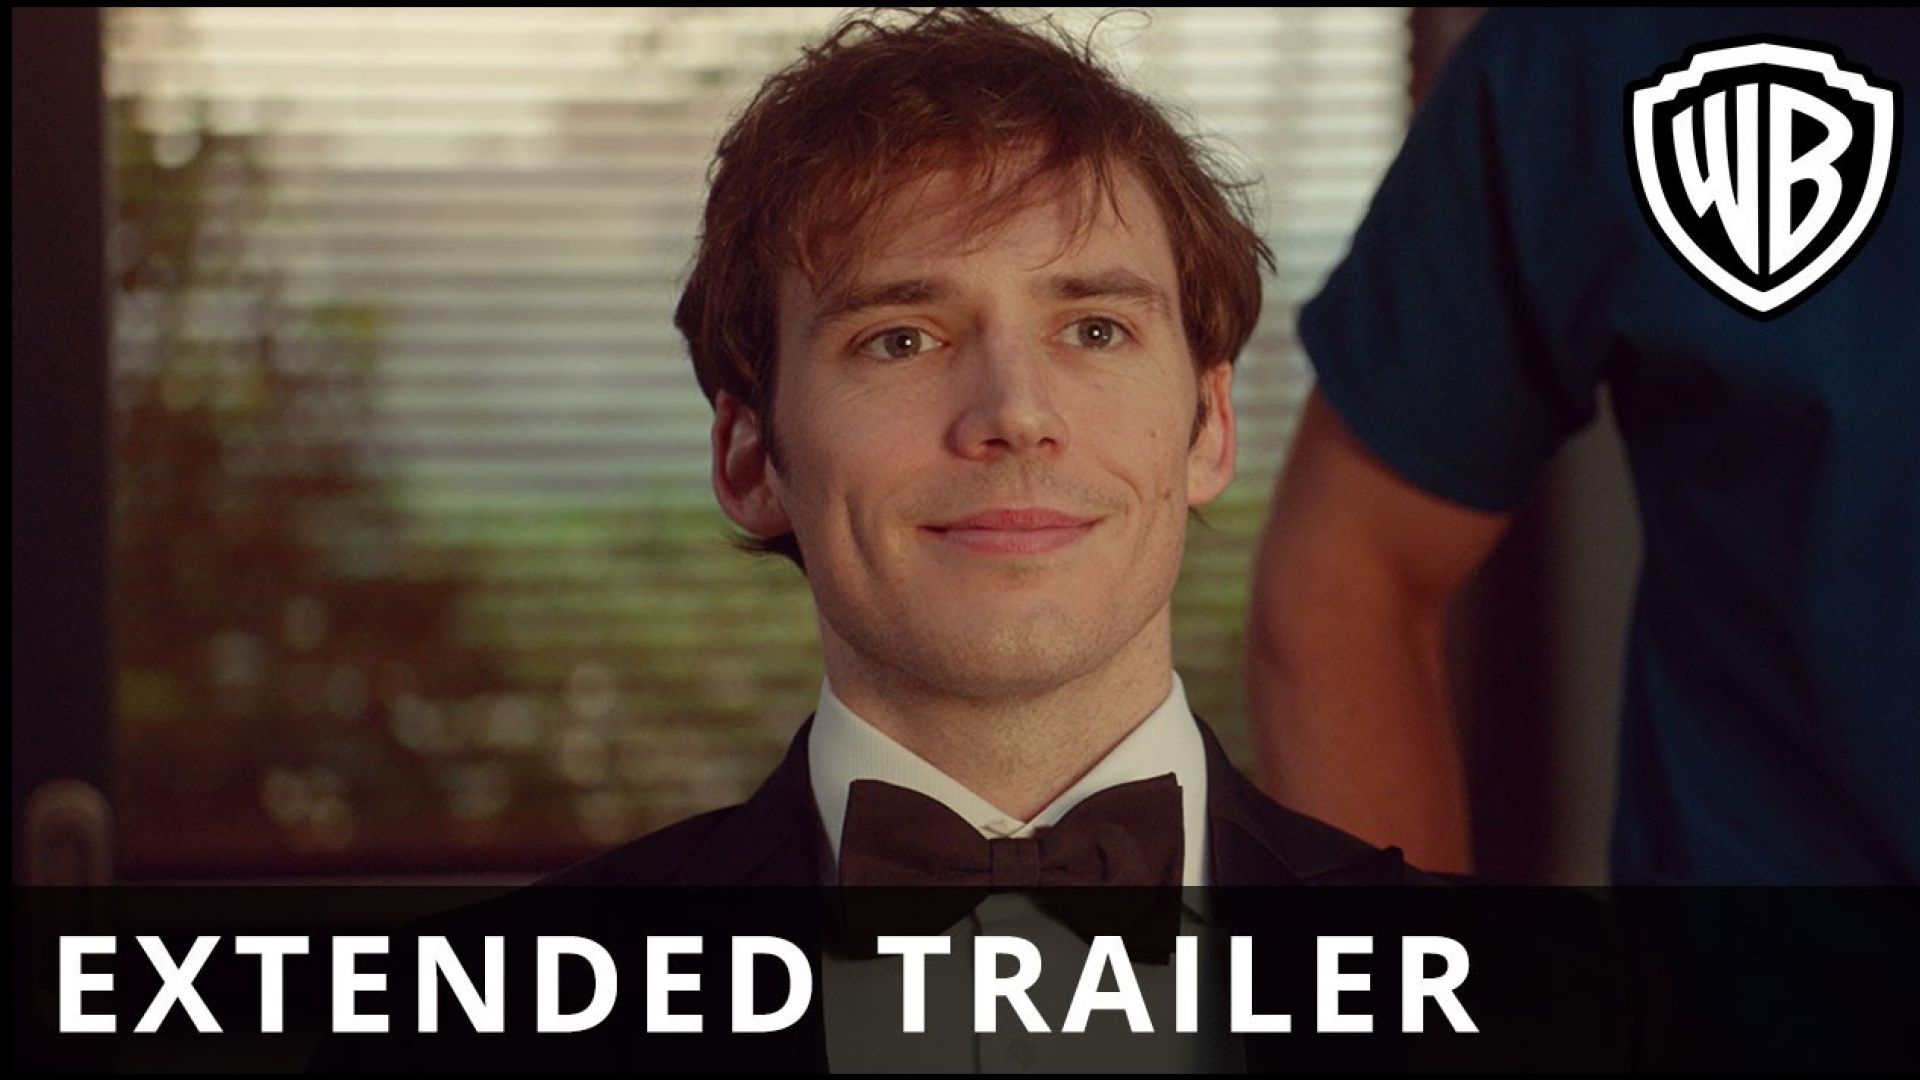 Official Trailer for &#039;Me Before You&#039;, Starring Emilia Clarke